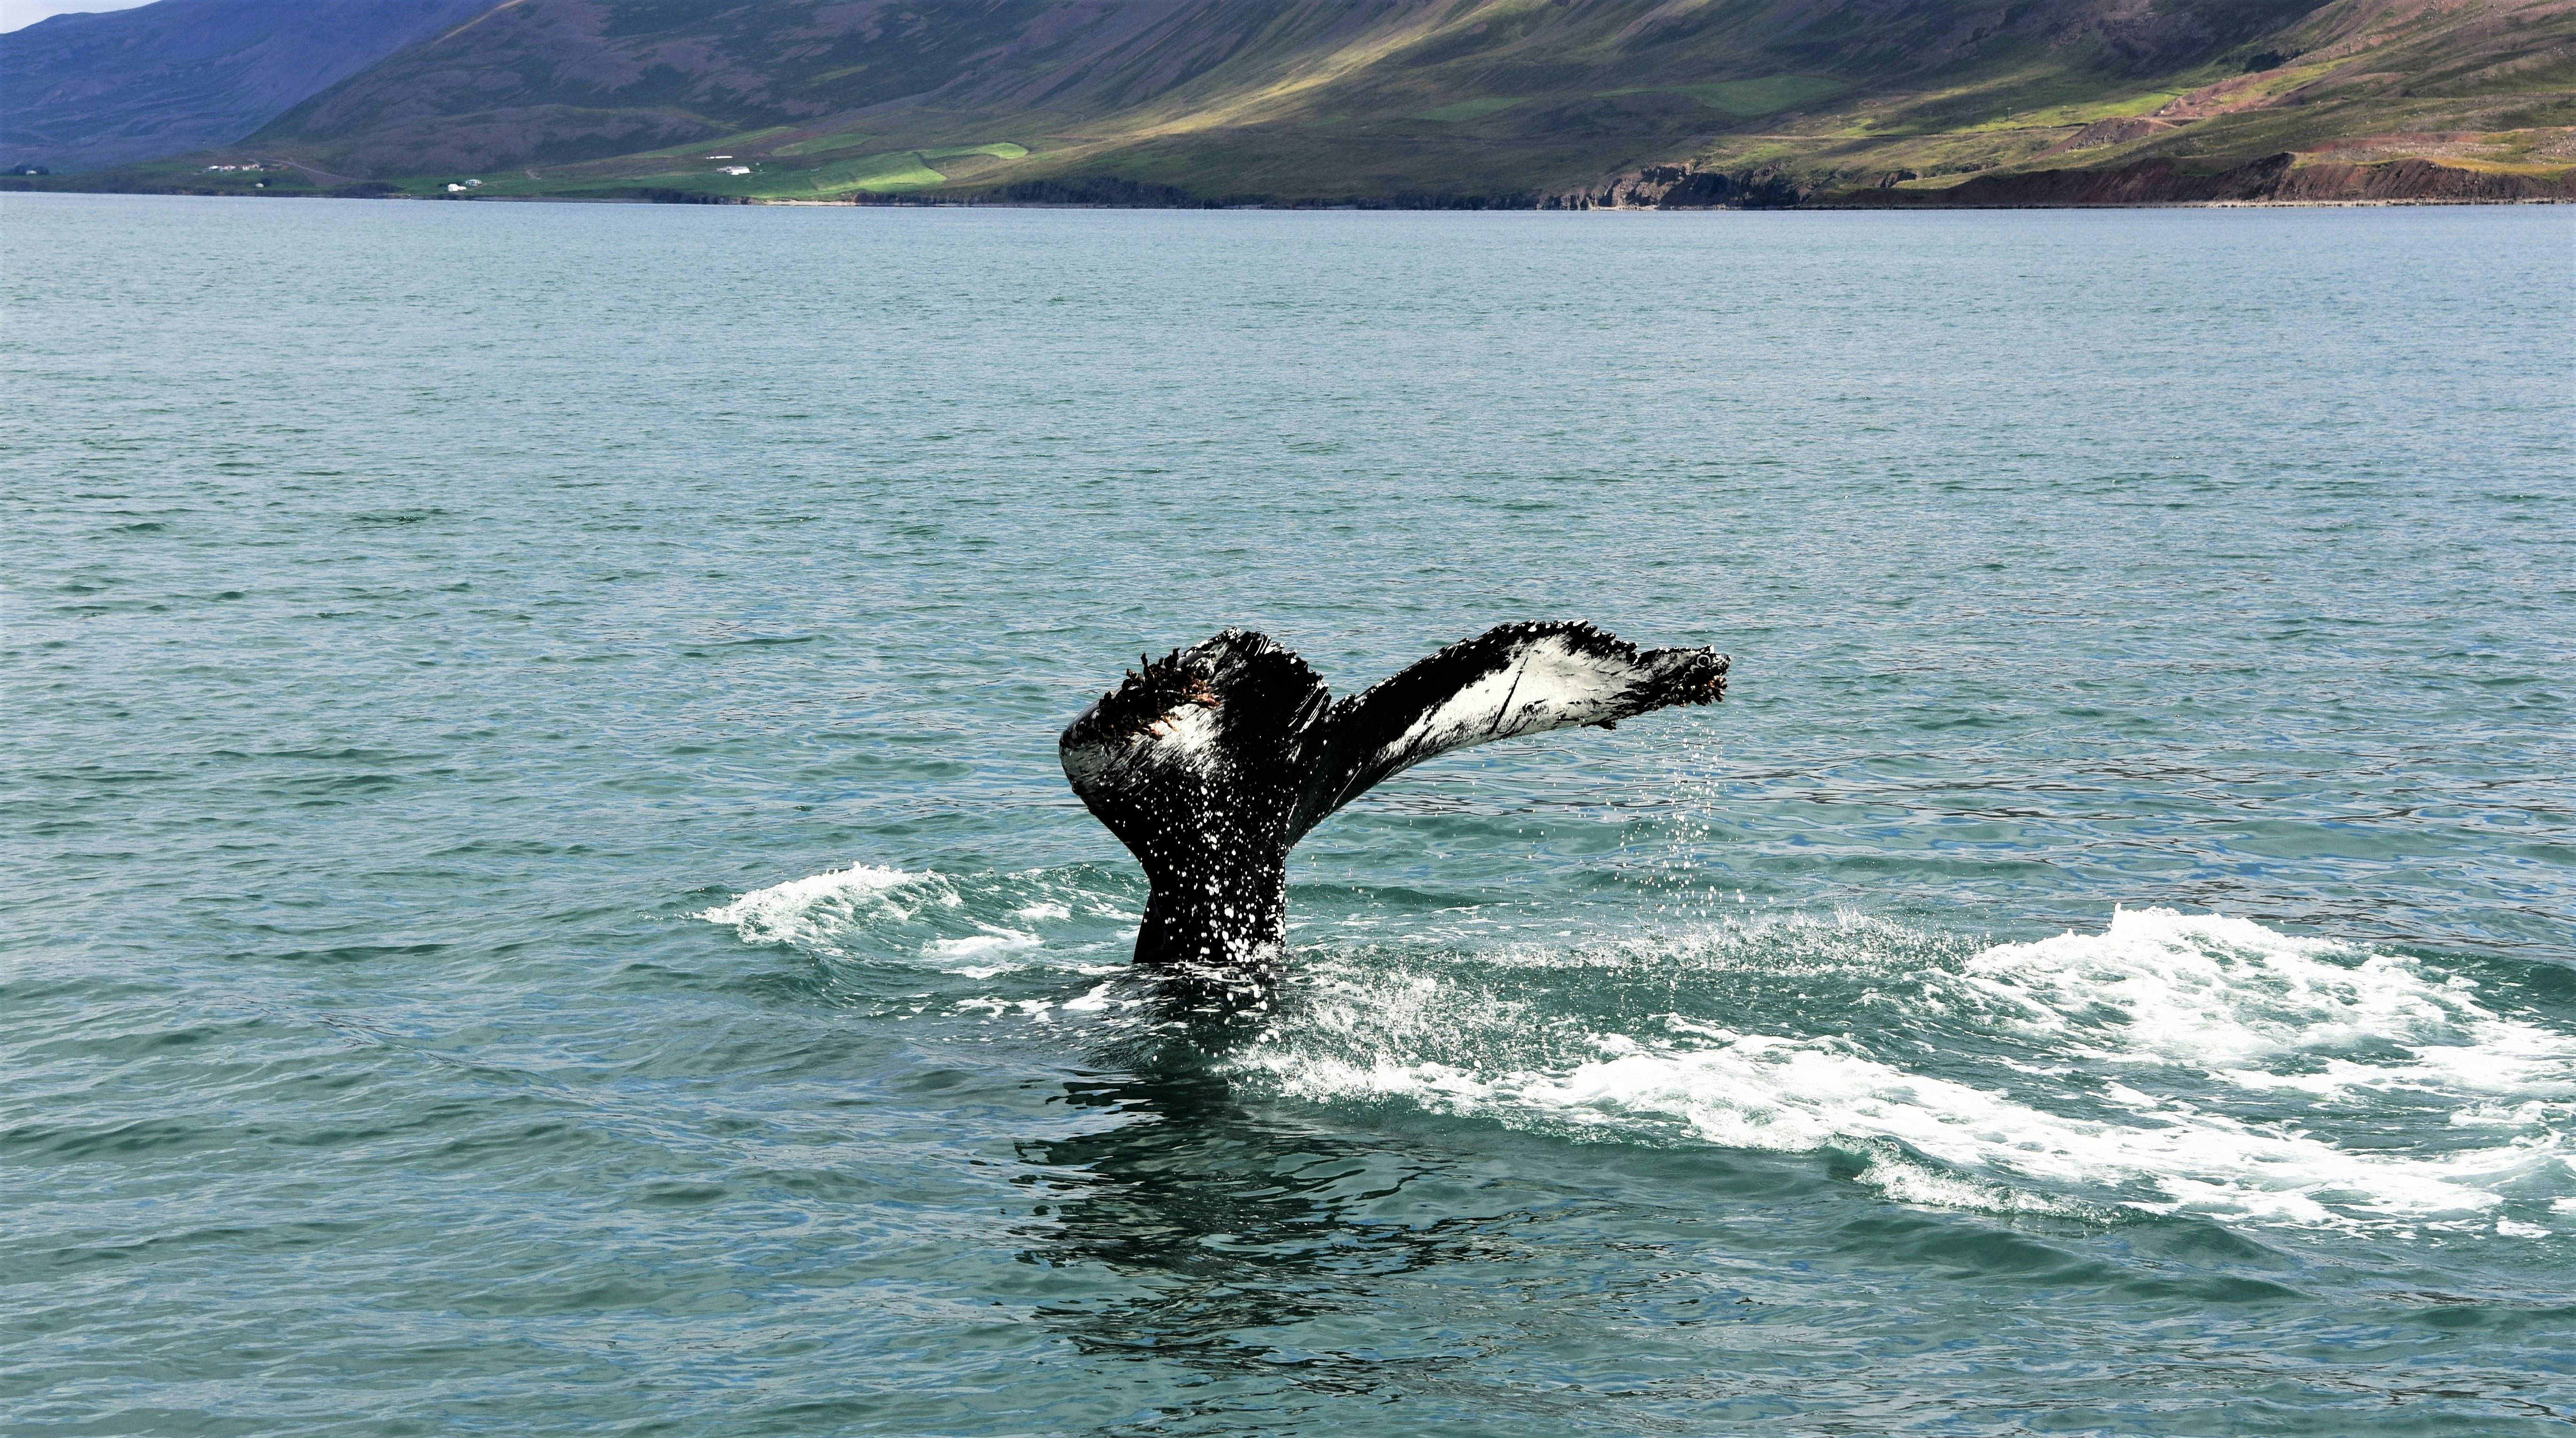 Whale watching express from Reykjavik